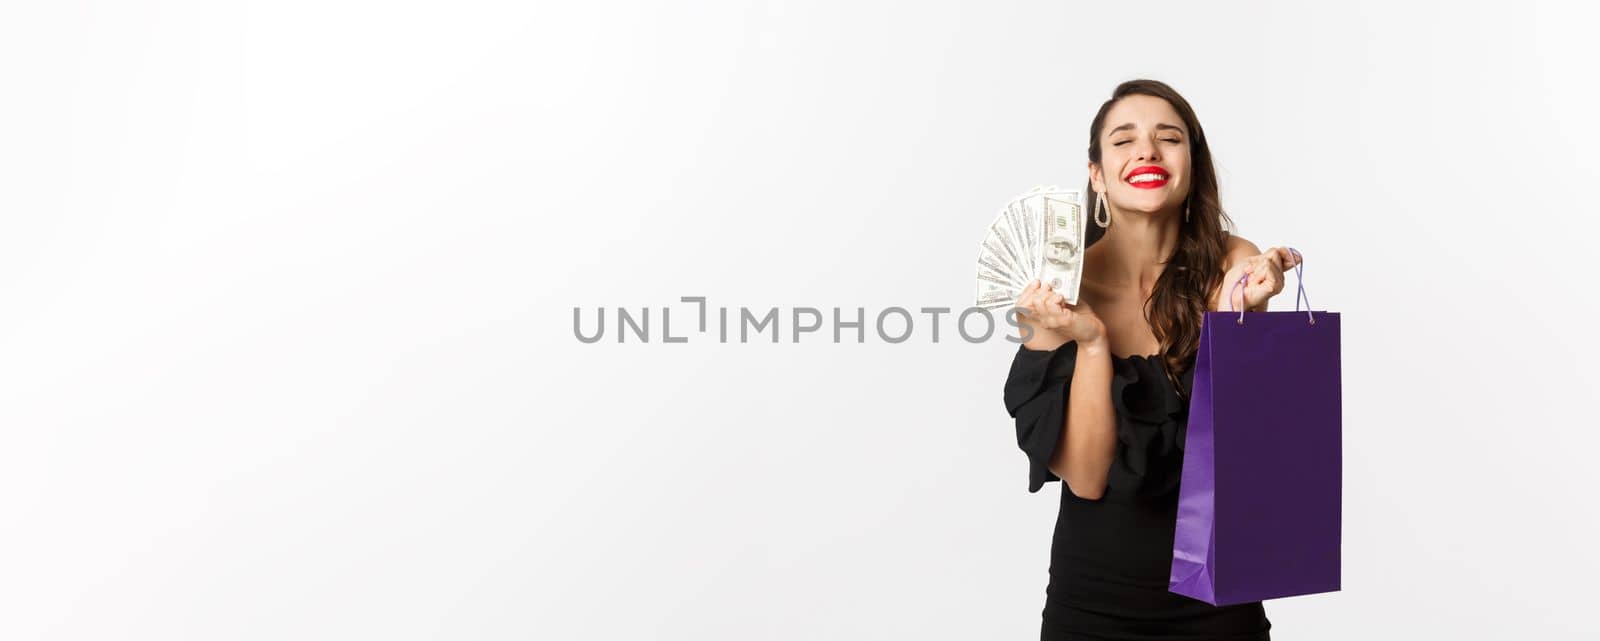 Satisfied and happy woman enjoying shopping, holding bag and money, smiling pleased, standing over white background.